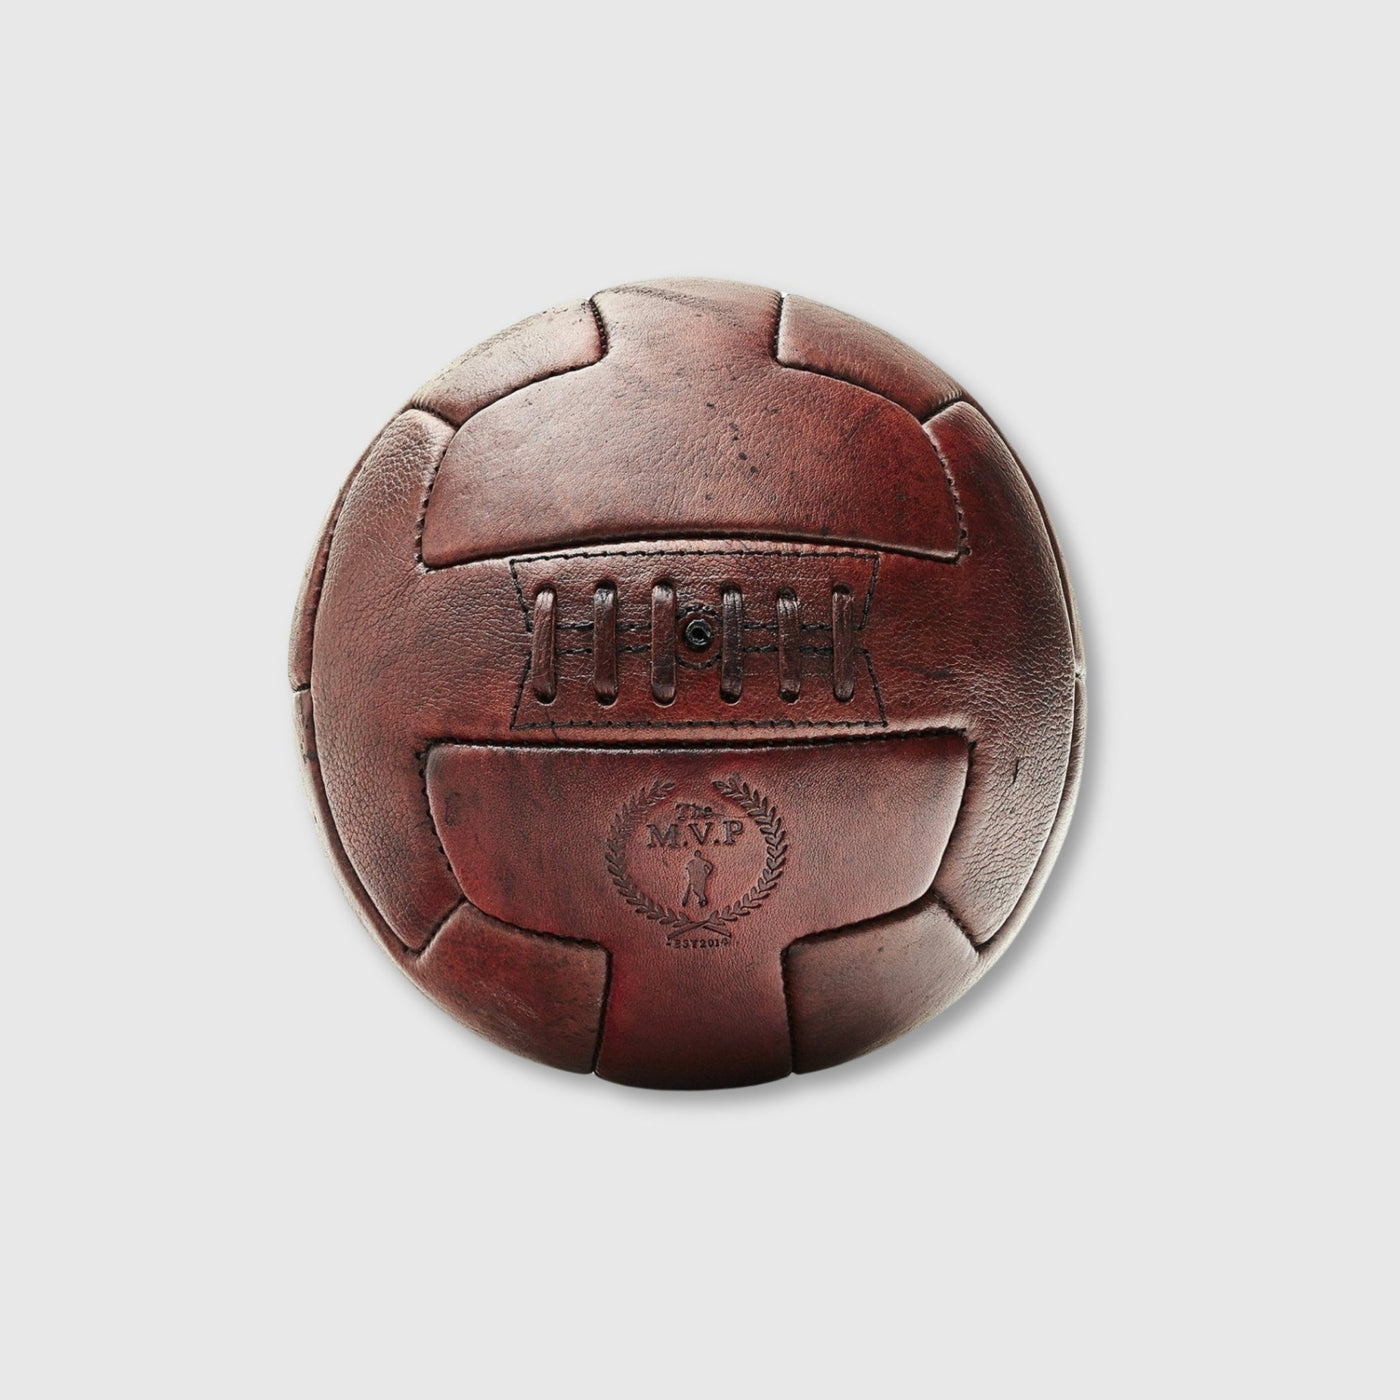 RETRO Heritage Brown Leather T Soccer ball - MODEST VINTAGE PLAYER LTD